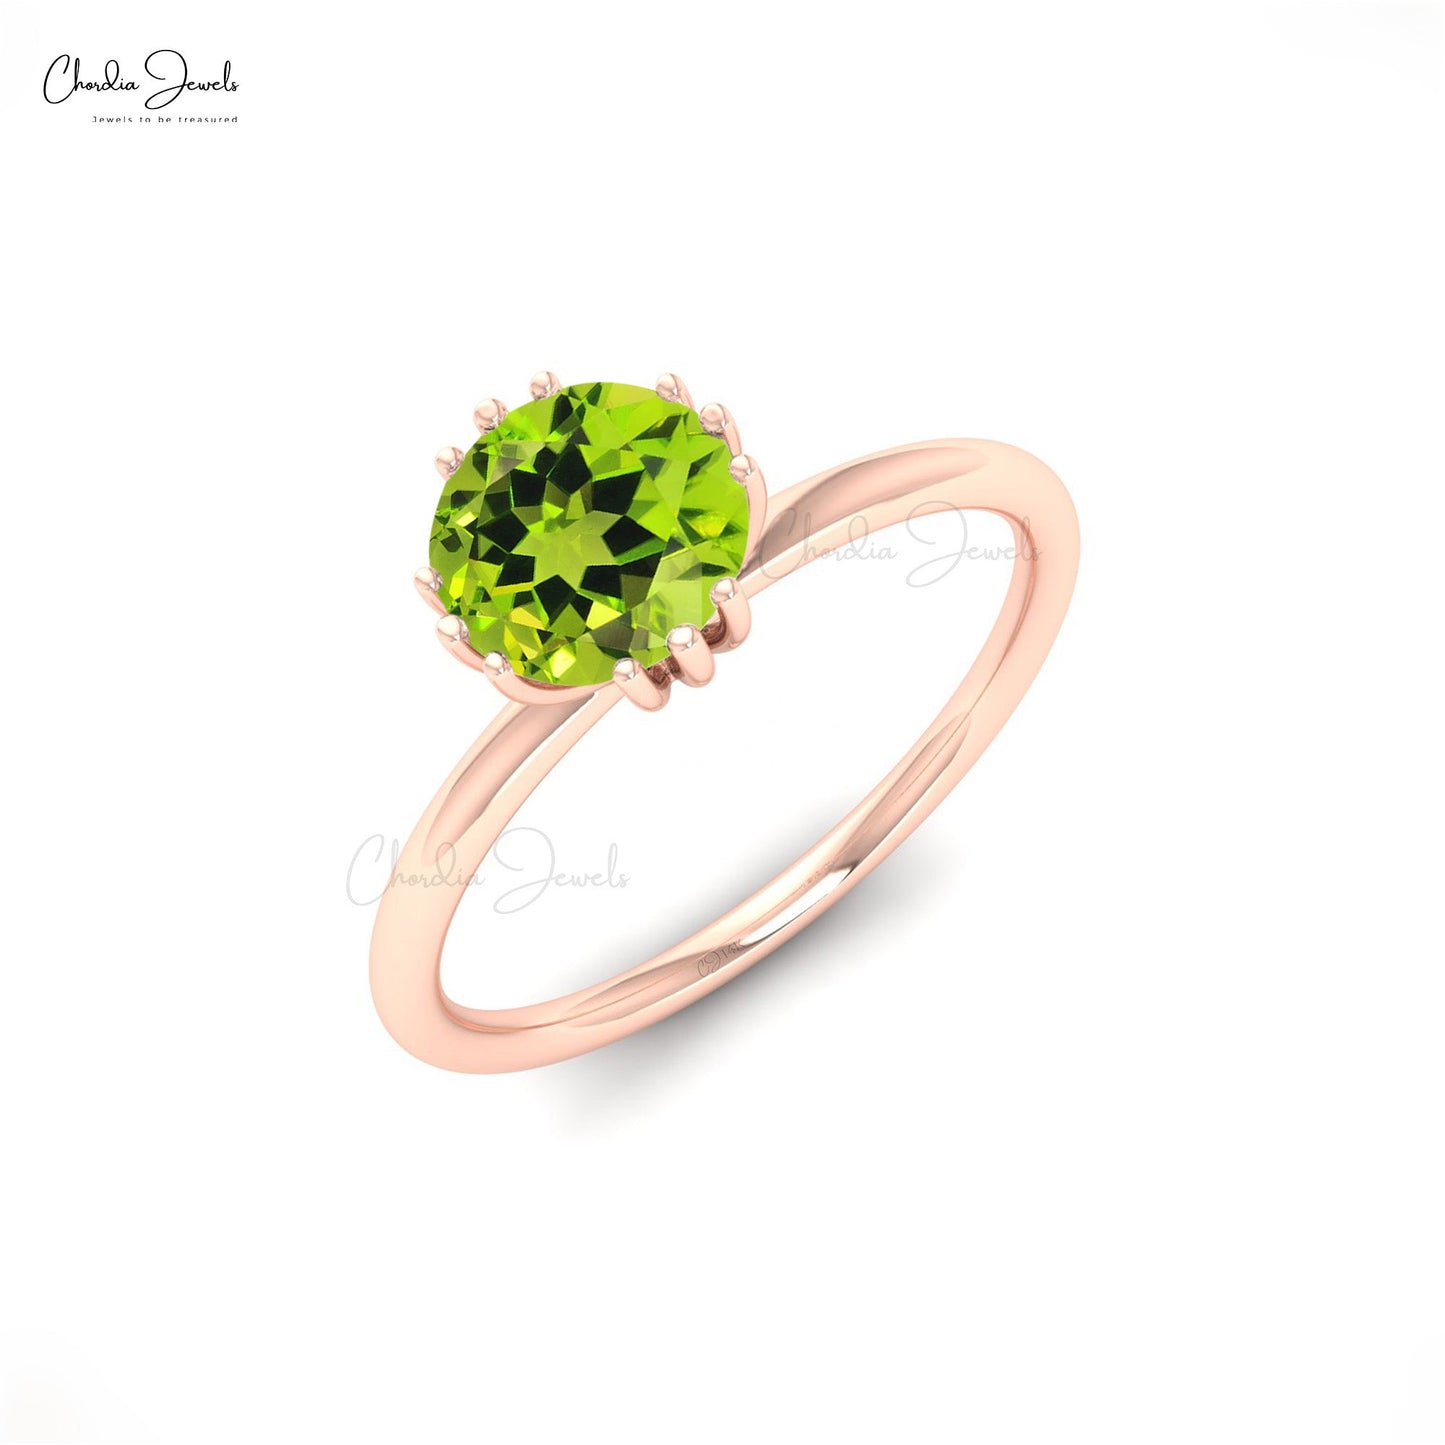 Load image into Gallery viewer, 14k Solid Gold Natural 0.74 Carat Peridot Gemstone Ring
